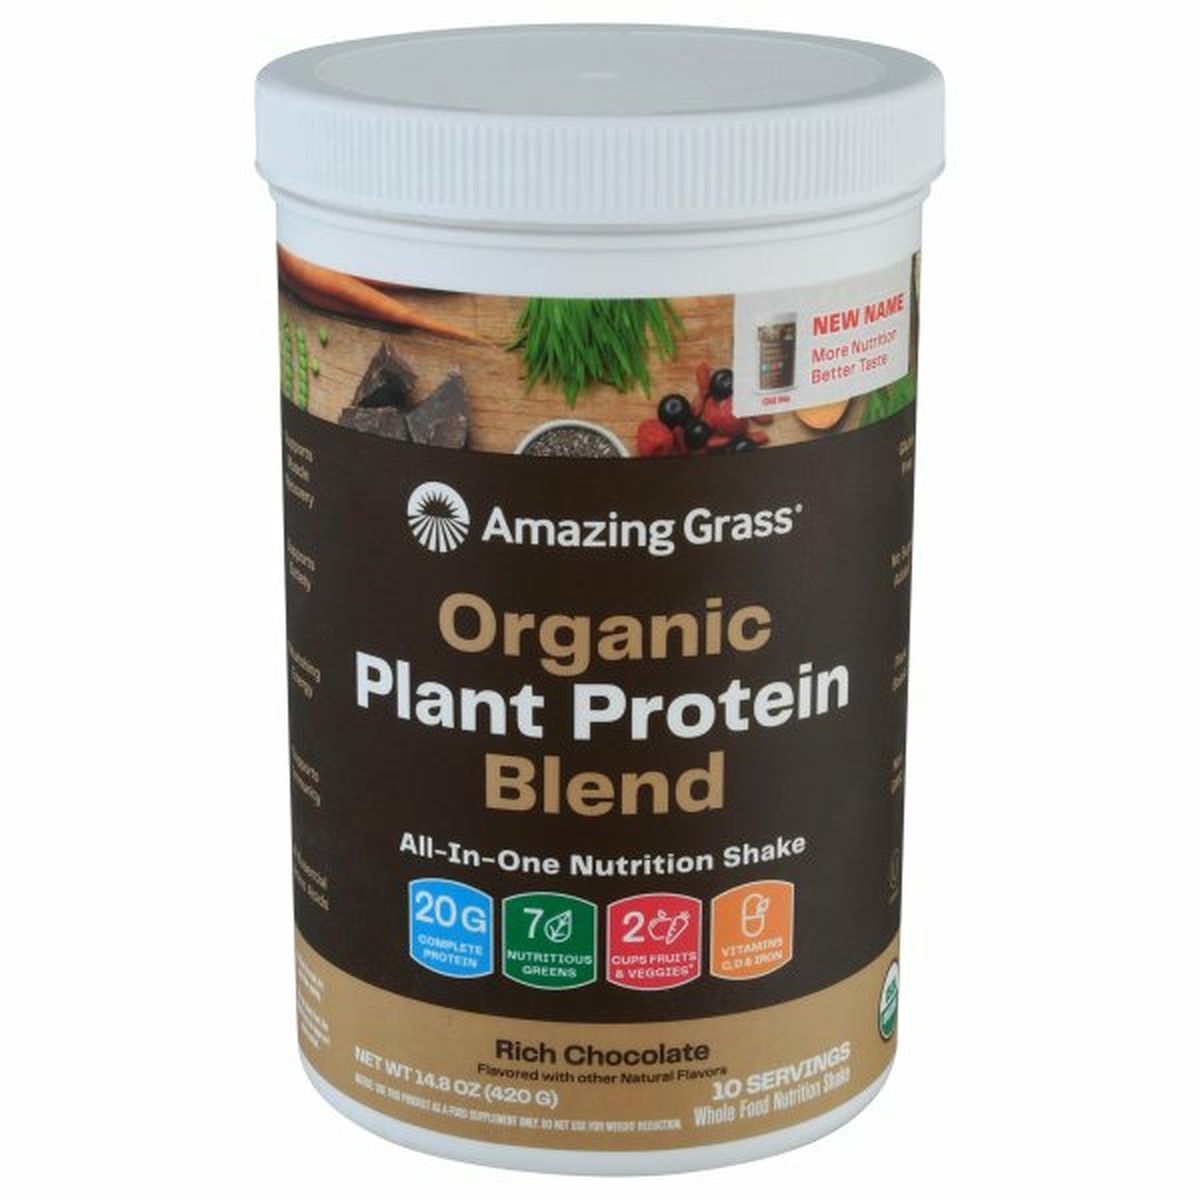 Calories in Amazing Grass Plant Protein Blend, Organic, Rich Chocolate